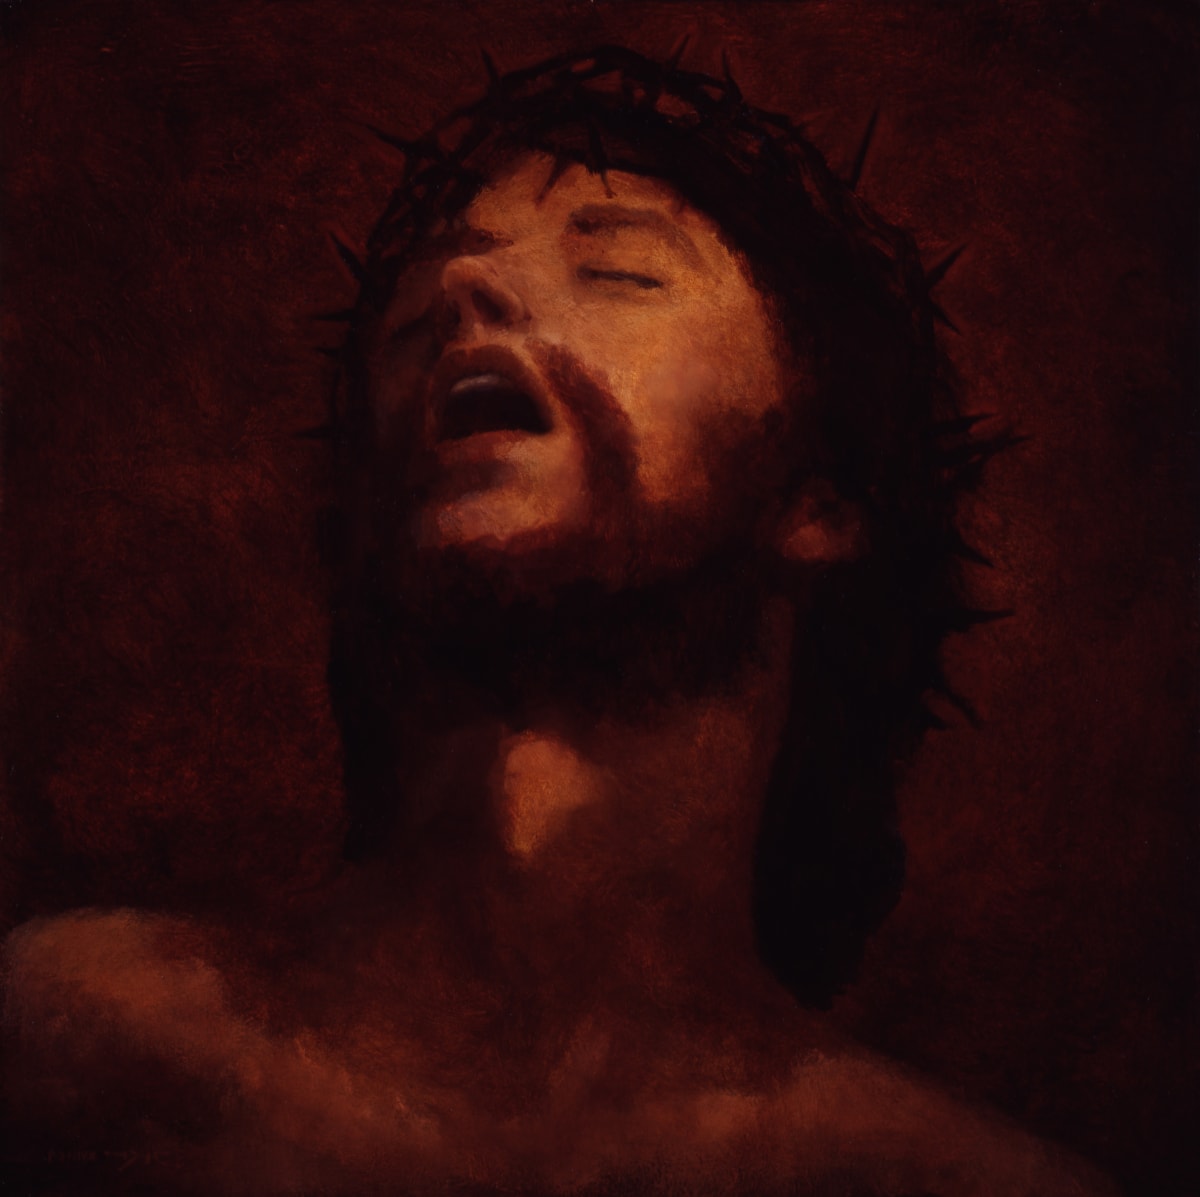 Crown of Thorns by J. Kirk Richards  Image: From a series of Christ portraits from 2009. 